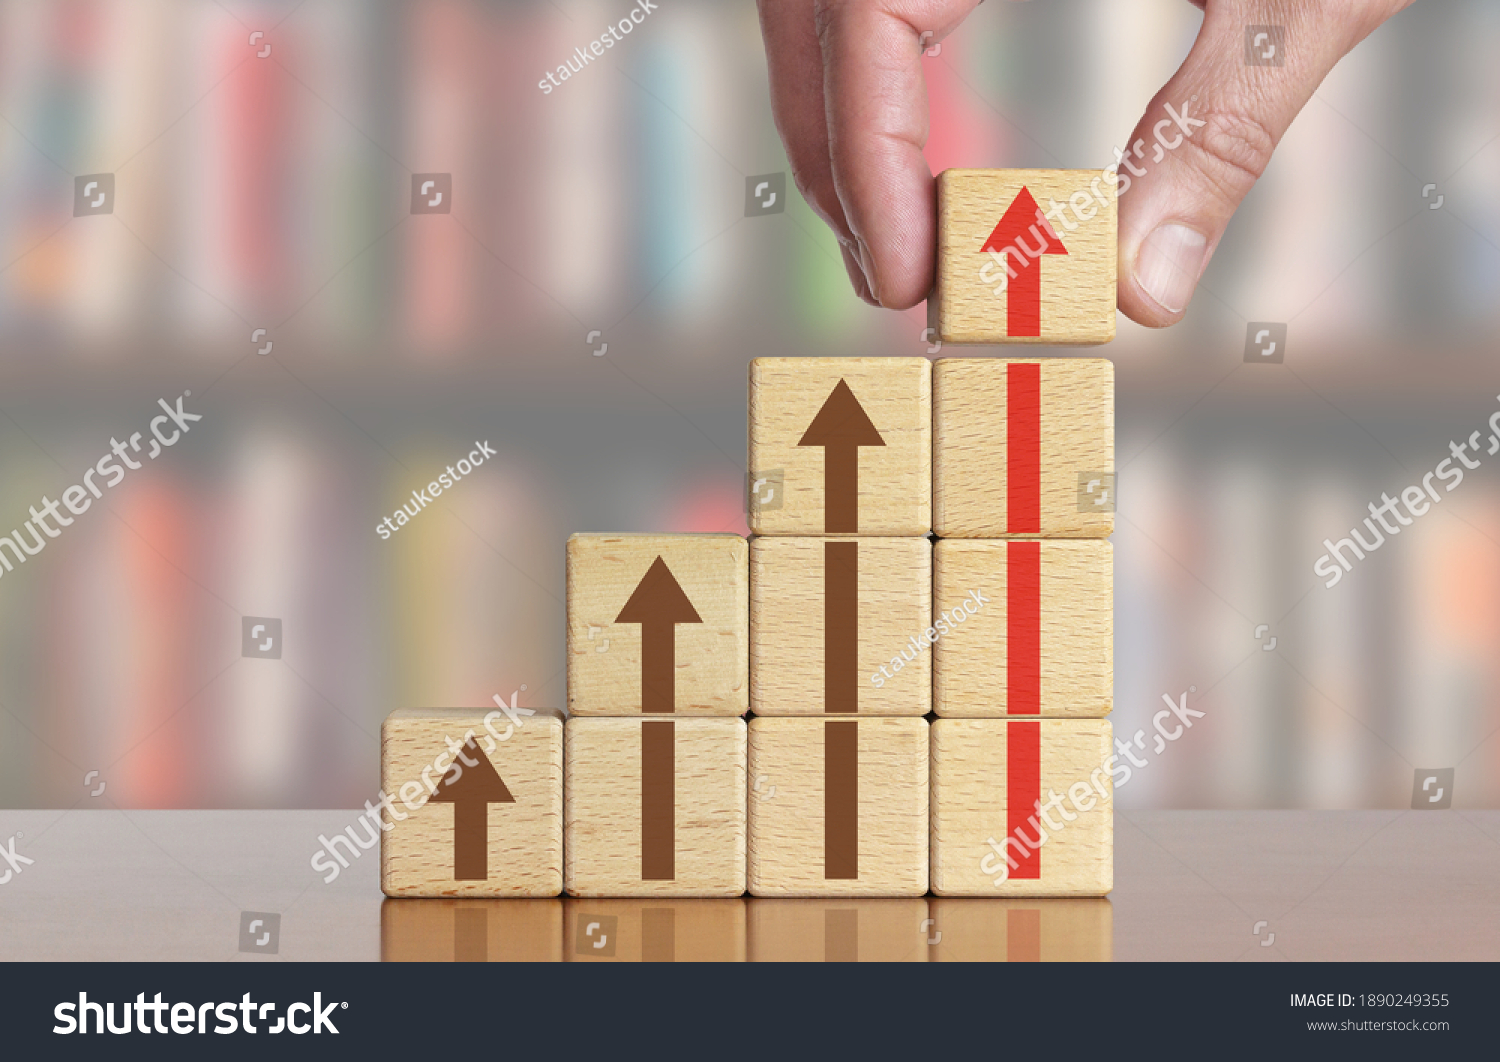 Hand arranging wood block stacking as step stair with arrow up. Ladder career path concept for business growth success process  #1890249355